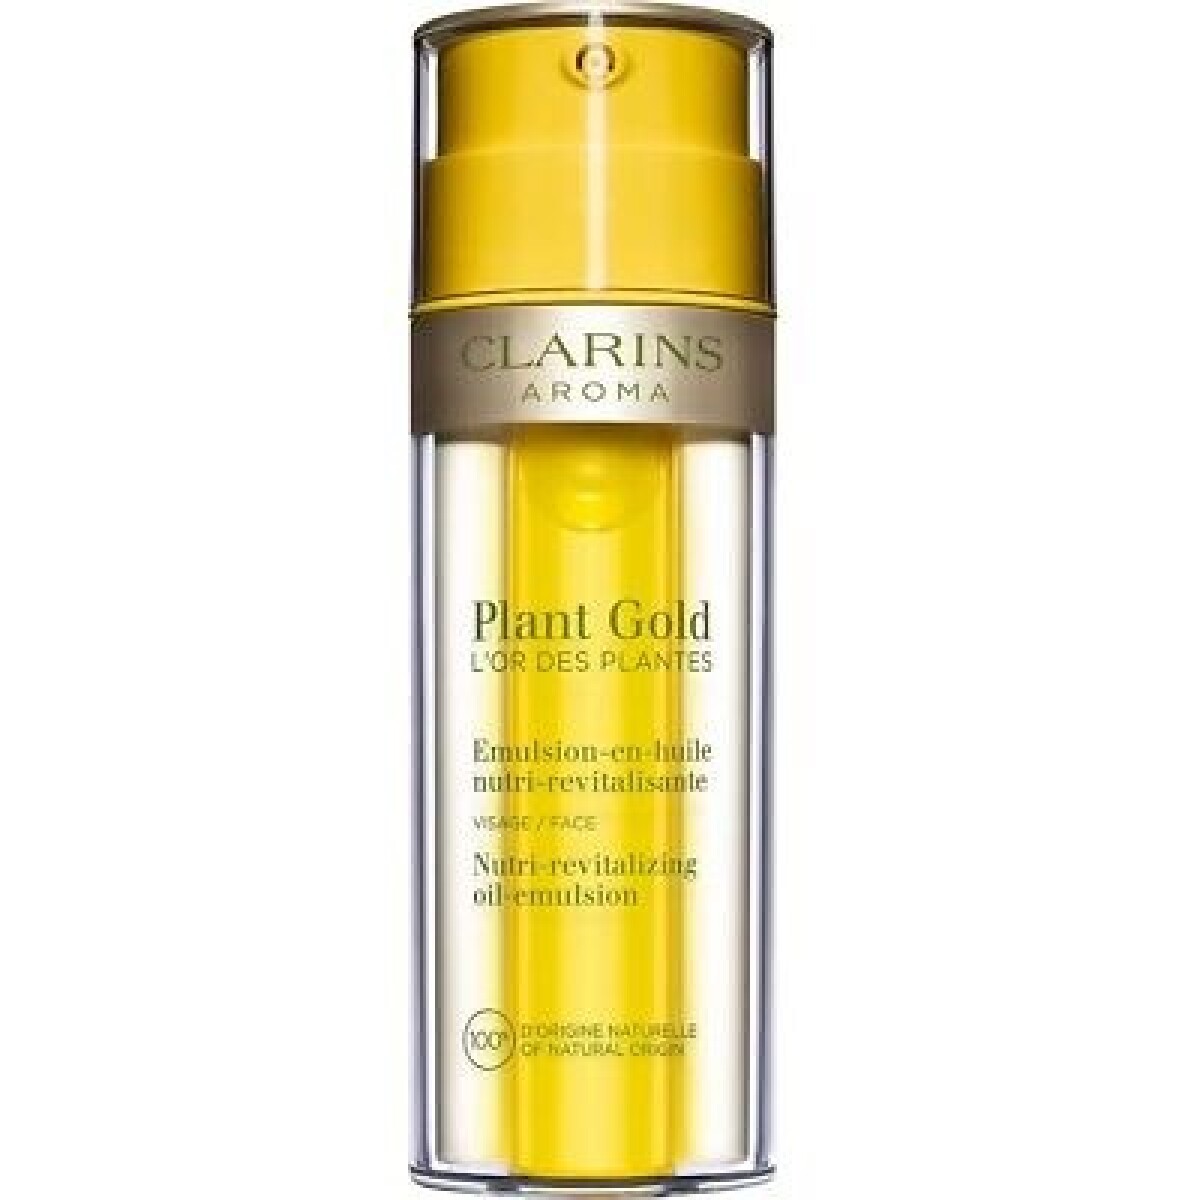 Clarins Plant Gold Face Oil Emulsion 